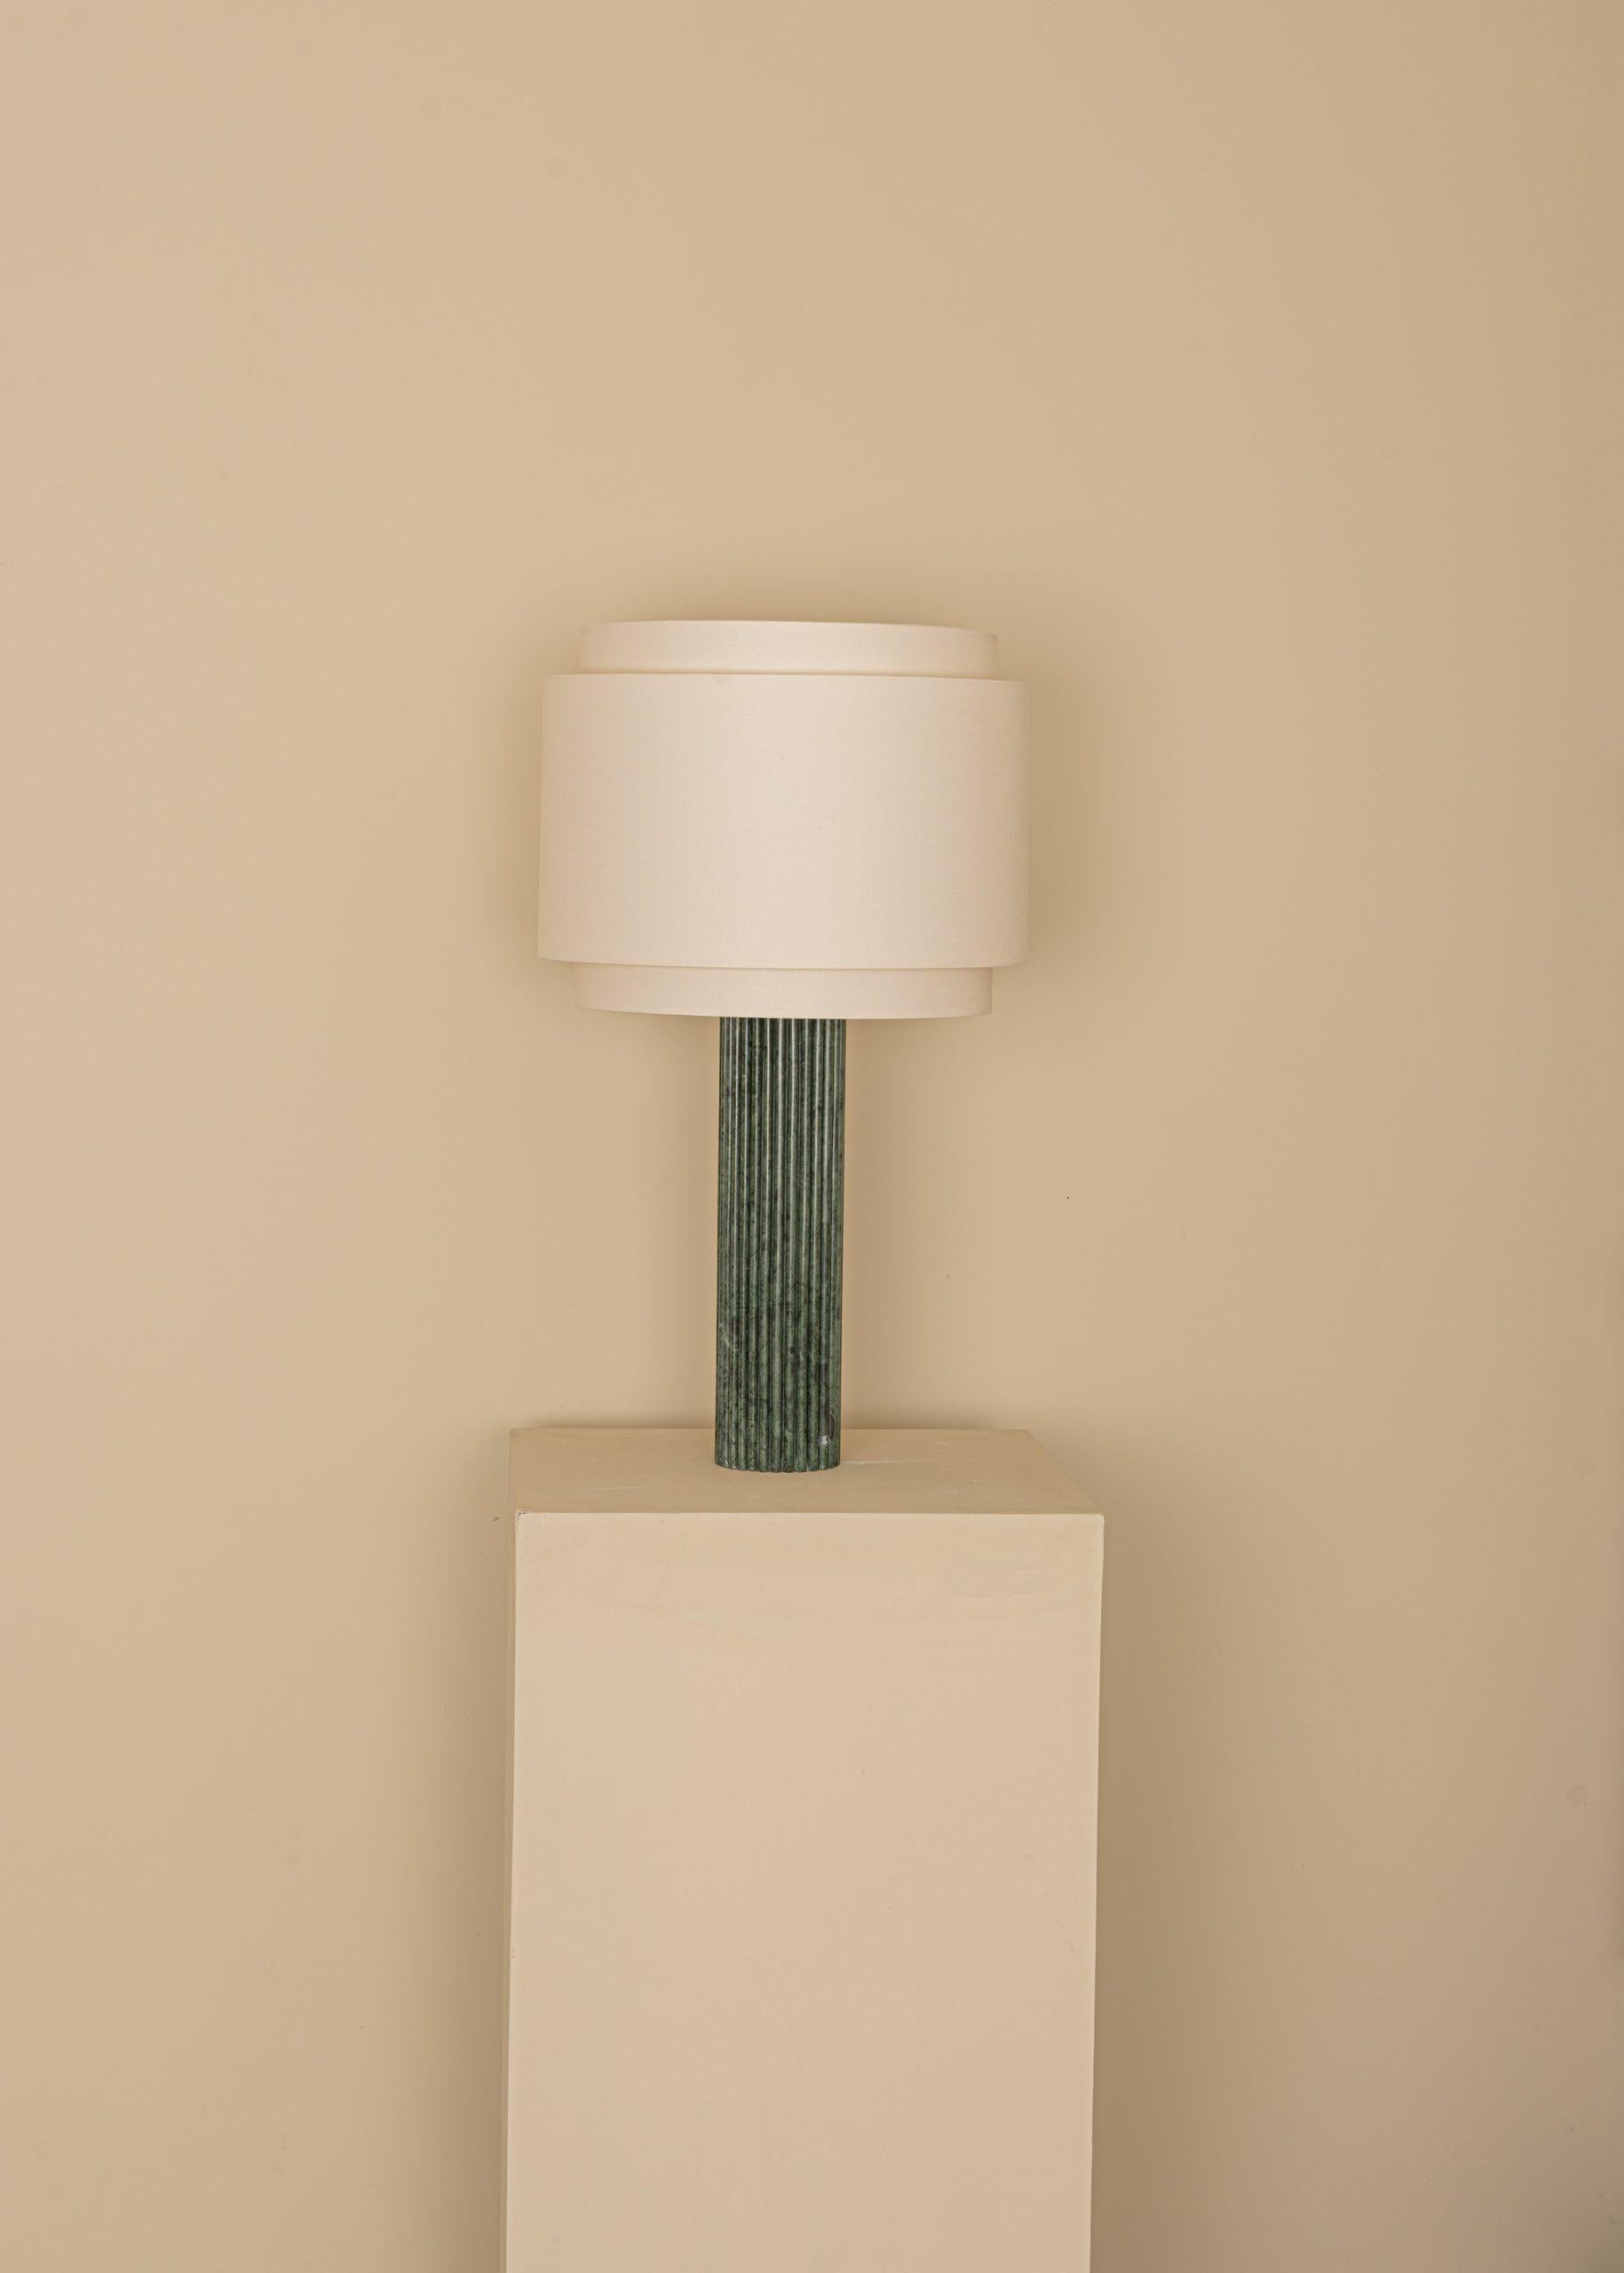 Green Marble Fluta DuobleTable Lamp by Simone & Marcel
Dimensions: D 35 x W 35 x H 60 cm.
Materials: Cotton and green marble.

Also available in different marble and wood options and finishes. Custom options available on request. Please contact us.